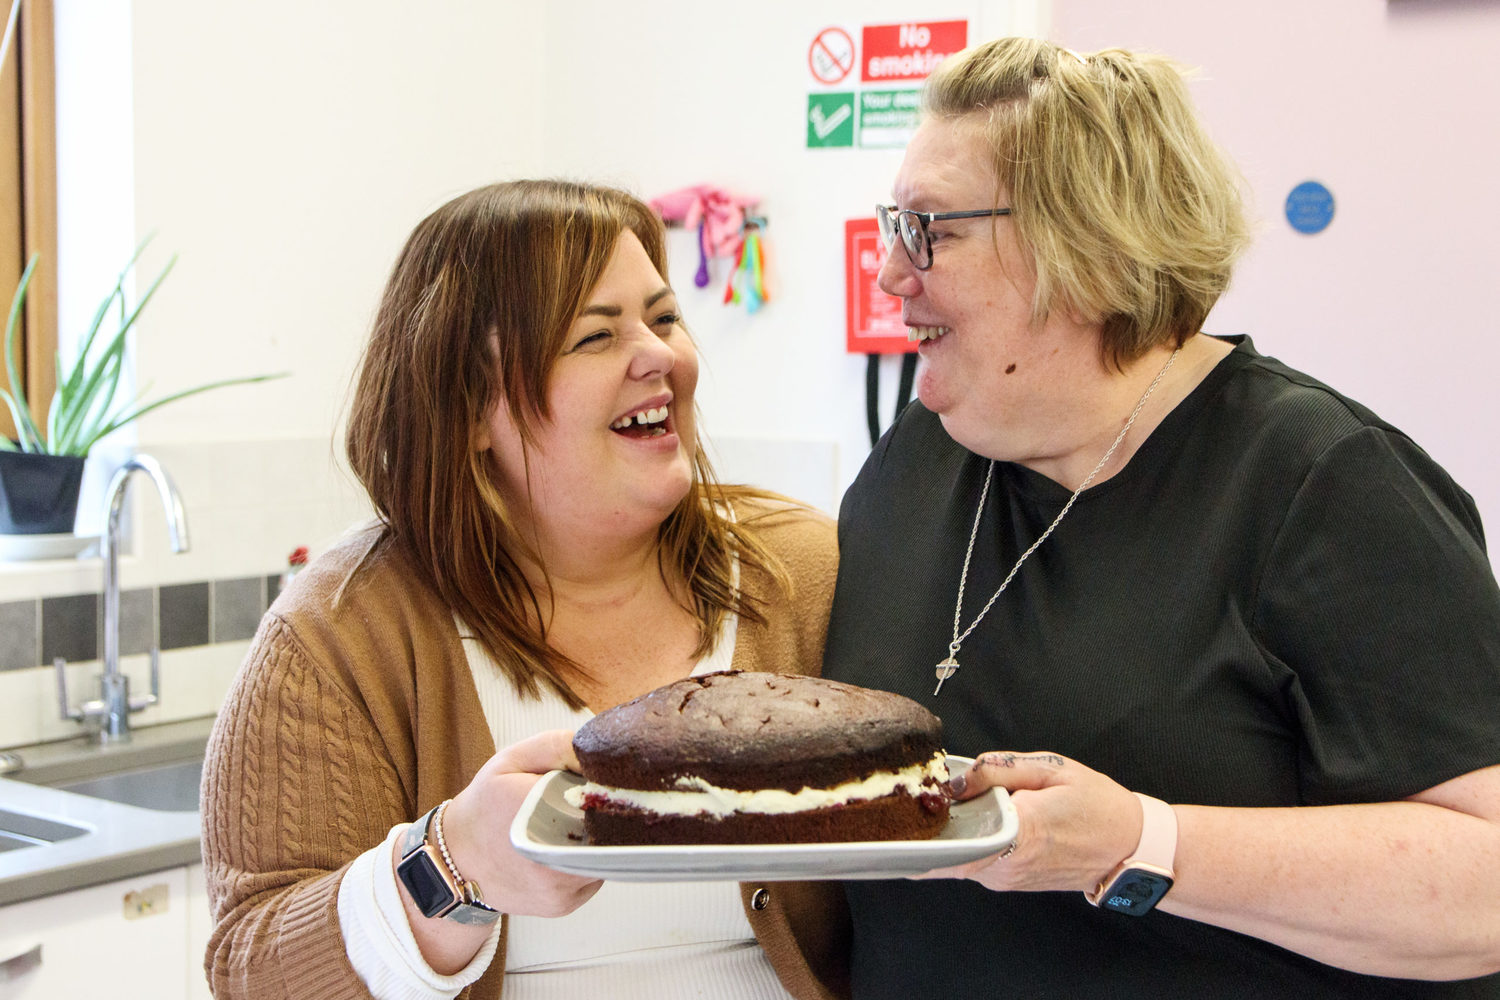 Two ladies, holding a chocolate cake, smiling and laughing